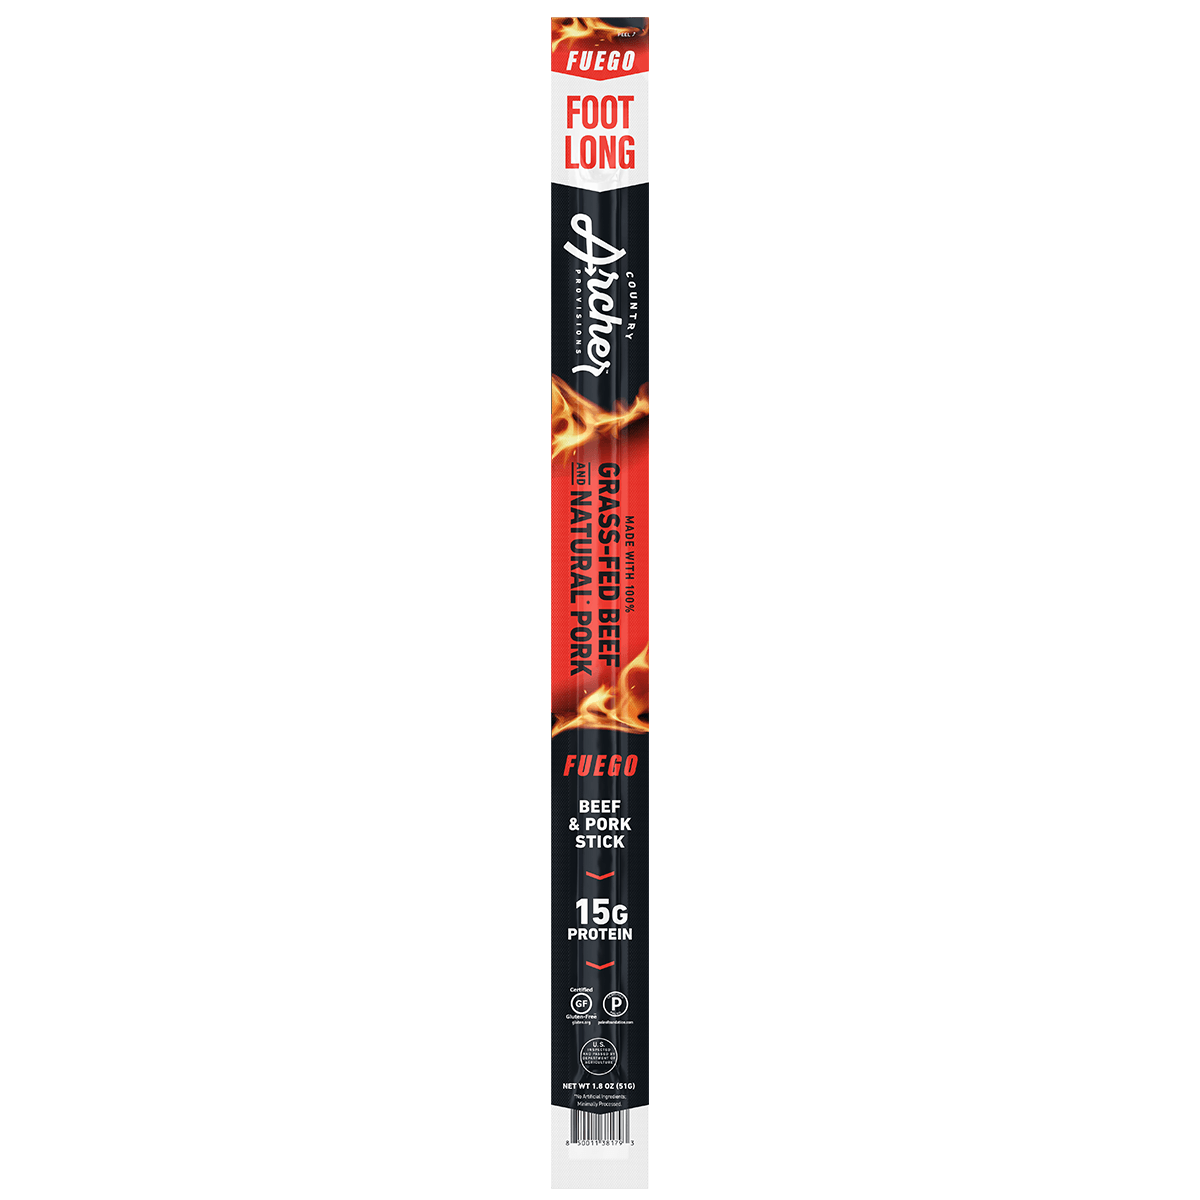  Fuego Footlong Beef & Pork Stick by Country Archer, Fuego Footlong Beef & Pork Stick, Beef - footlong stick - Gluten-Free - Grass Fed Beef - Keto - No Preservatives - Paleo - Real Ingredients - spicy - stick, fuego-footlong-beef-pork-stick, , 1.8oz Stick